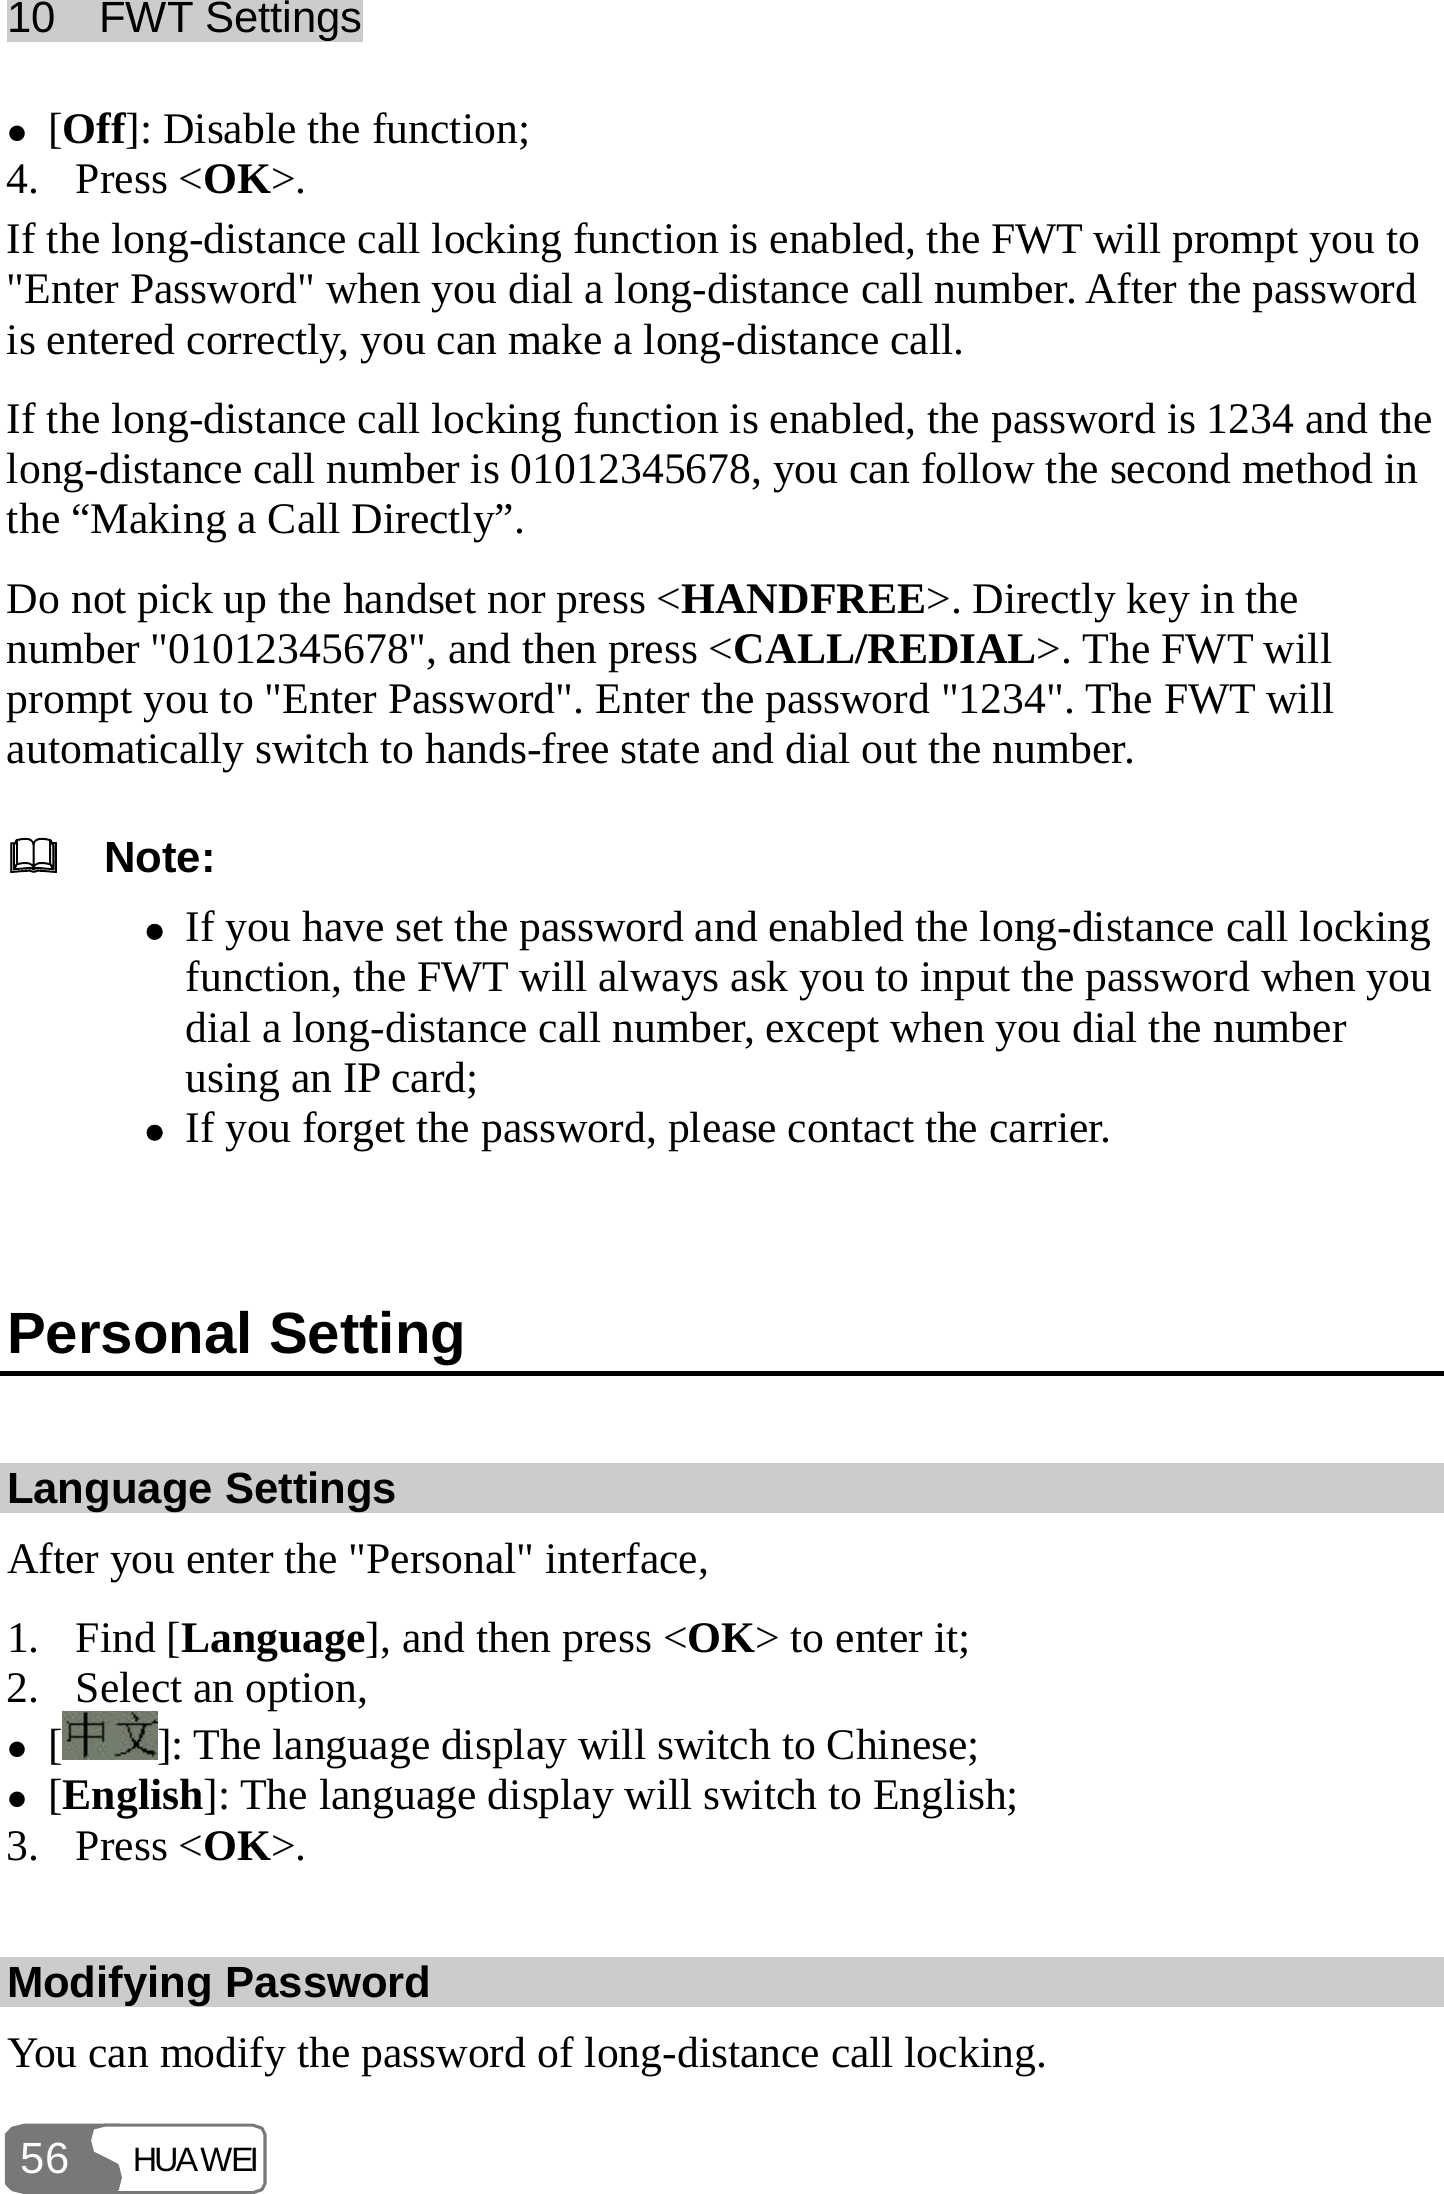 10  FWT Settings HUAWEI 56 z [Off]: Disable the function; 4. Press &lt;OK&gt;. If the long-distance call locking function is enabled, the FWT will prompt you to &quot;Enter Password&quot; when you dial a long-distance call number. After the password is entered correctly, you can make a long-distance call. If the long-distance call locking function is enabled, the password is 1234 and the long-distance call number is 01012345678, you can follow the second method in the “Making a Call Directly”. Do not pick up the handset nor press &lt;HANDFREE&gt;. Directly key in the number &quot;01012345678&quot;, and then press &lt;CALL/REDIAL&gt;. The FWT will prompt you to &quot;Enter Password&quot;. Enter the password &quot;1234&quot;. The FWT will automatically switch to hands-free state and dial out the number.   Note: z If you have set the password and enabled the long-distance call locking function, the FWT will always ask you to input the password when you dial a long-distance call number, except when you dial the number using an IP card; z If you forget the password, please contact the carrier.  Personal Setting Language Settings After you enter the &quot;Personal&quot; interface, 1. Find [Language], and then press &lt;OK&gt; to enter it; 2. Select an option, z []: The language display will switch to Chinese; z [English]: The language display will switch to English; 3. Press &lt;OK&gt;. Modifying Password You can modify the password of long-distance call locking. 